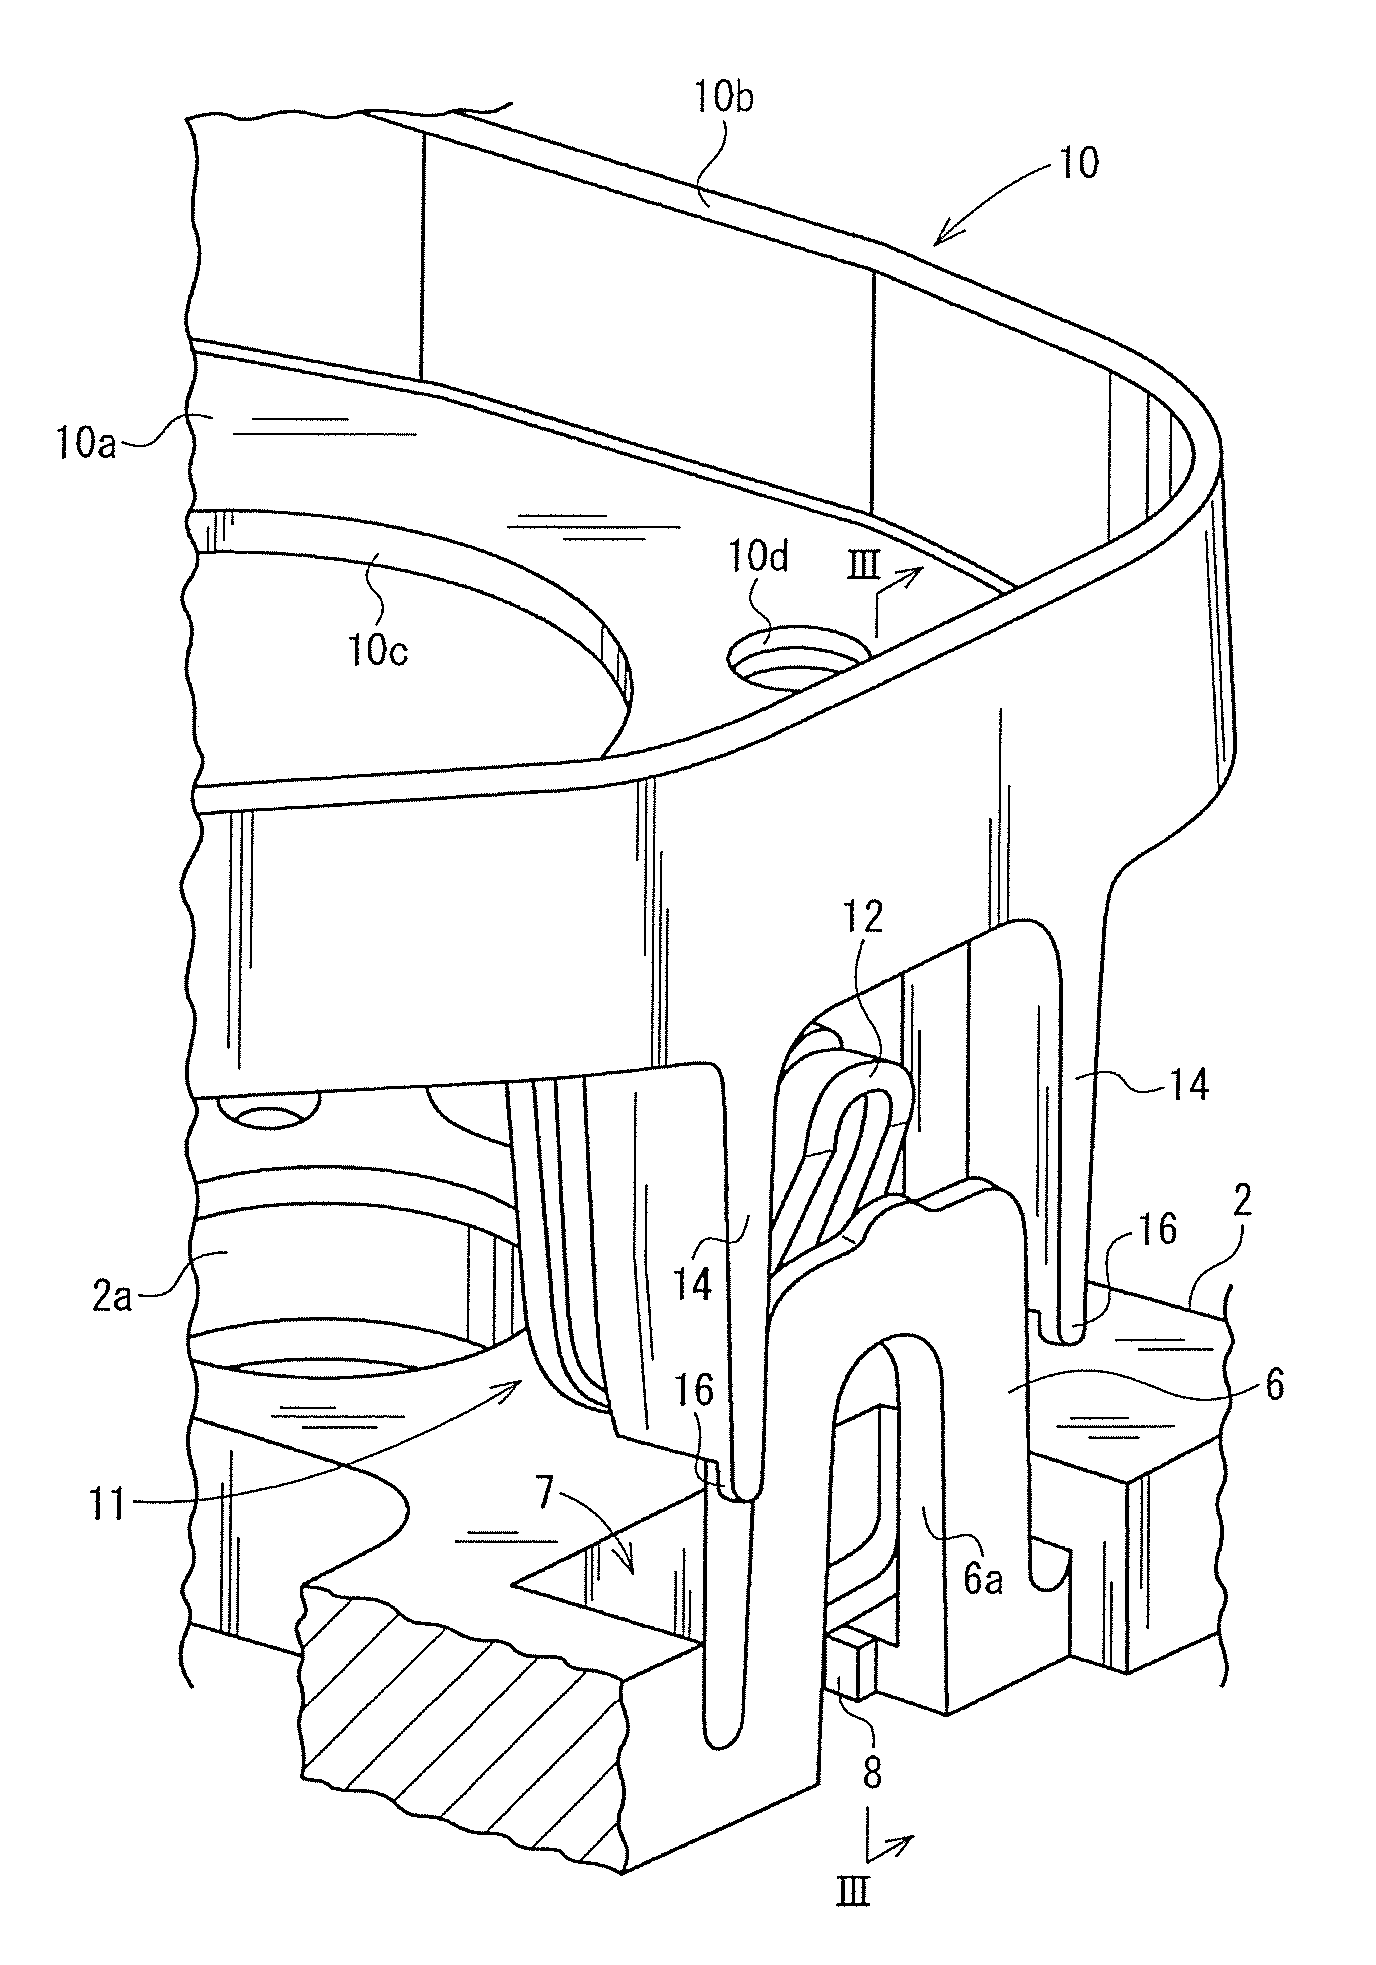 Driver-airbag-apparatus-attaching structure and steering wheel